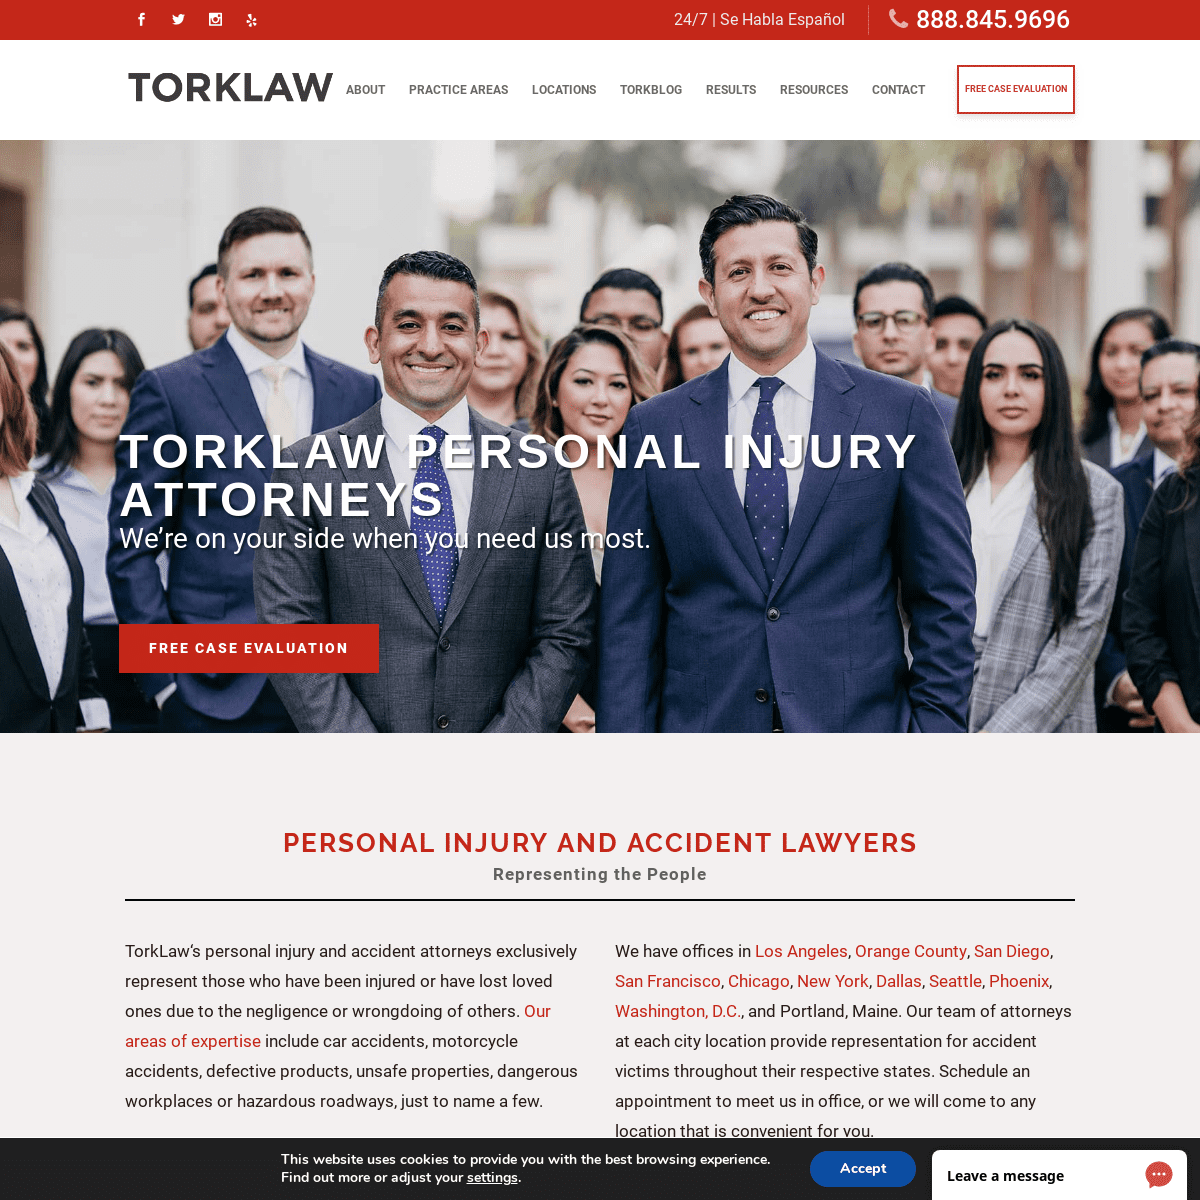 TORKLAW - Personal Injury and Accident Lawyers